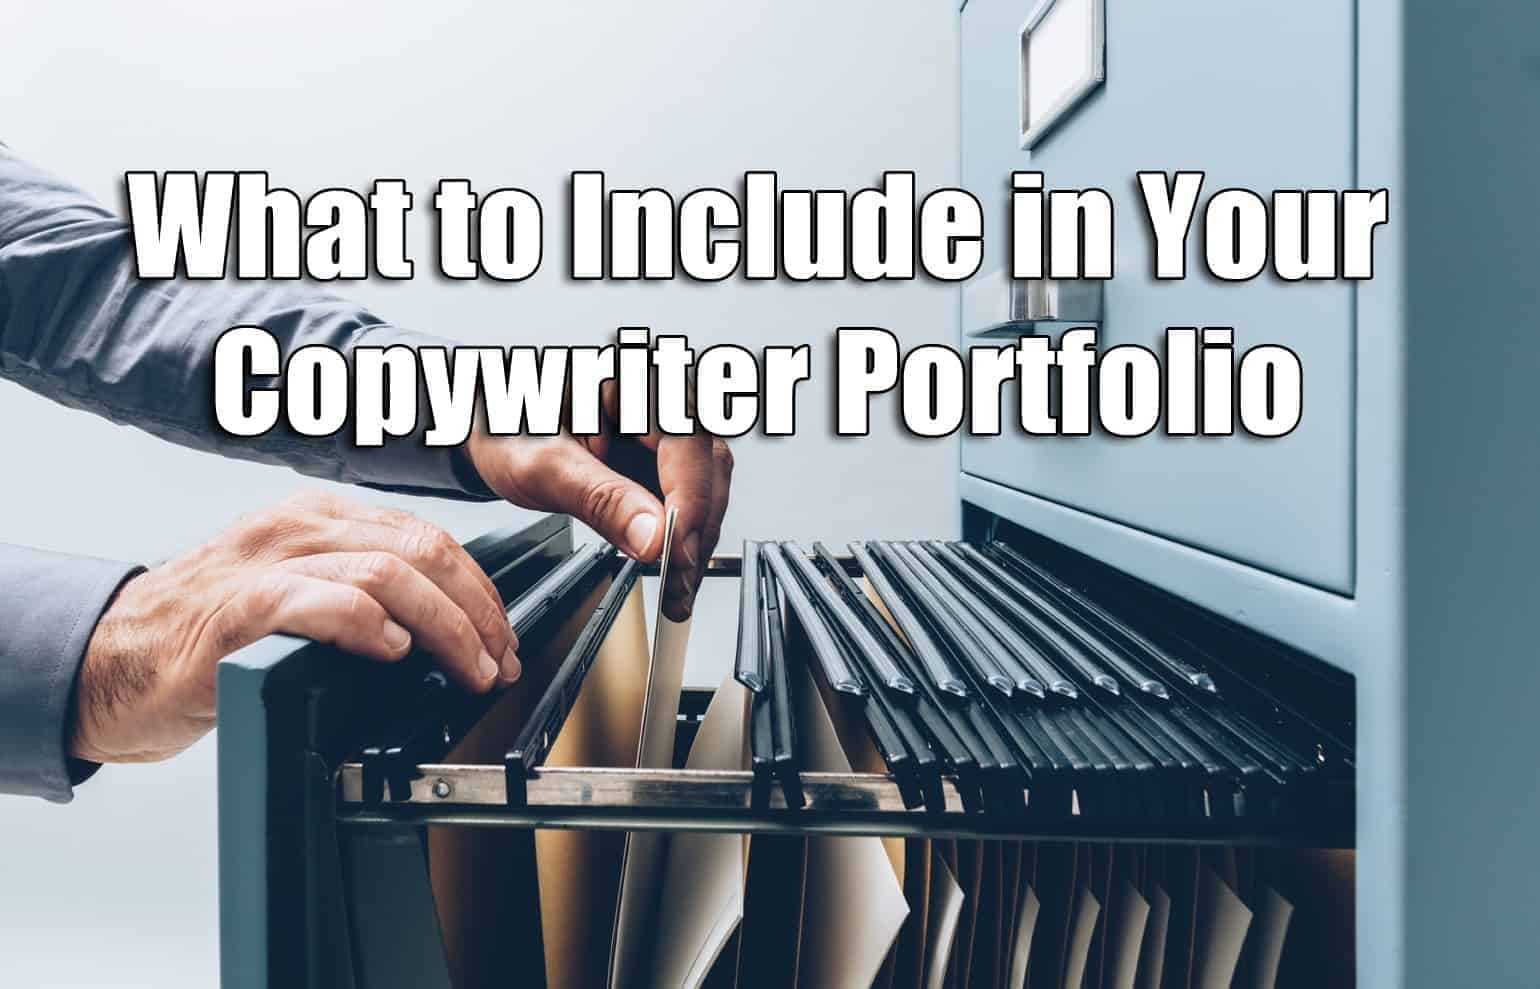 What You Should Include in Your Copywriter Portfolio